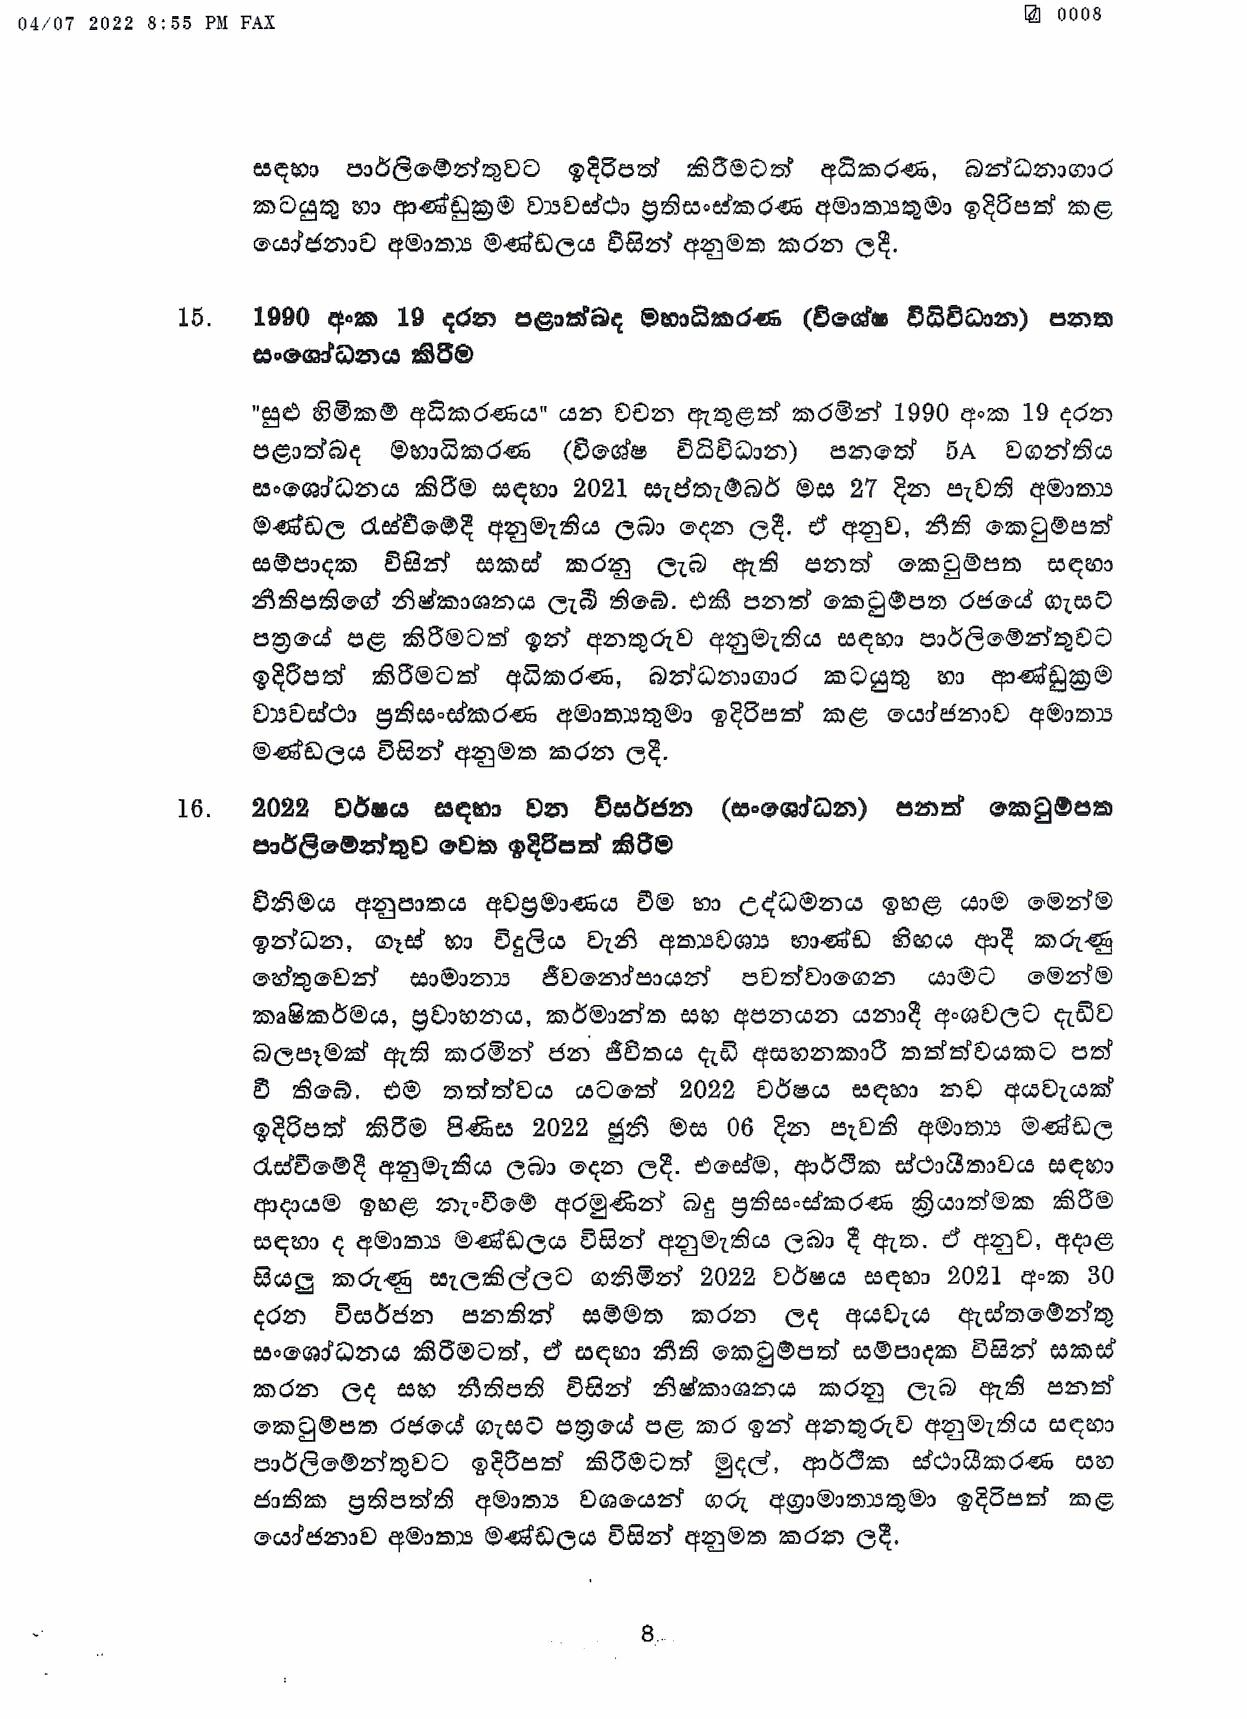 Cabinet Decision on 04.07.2022 page 008